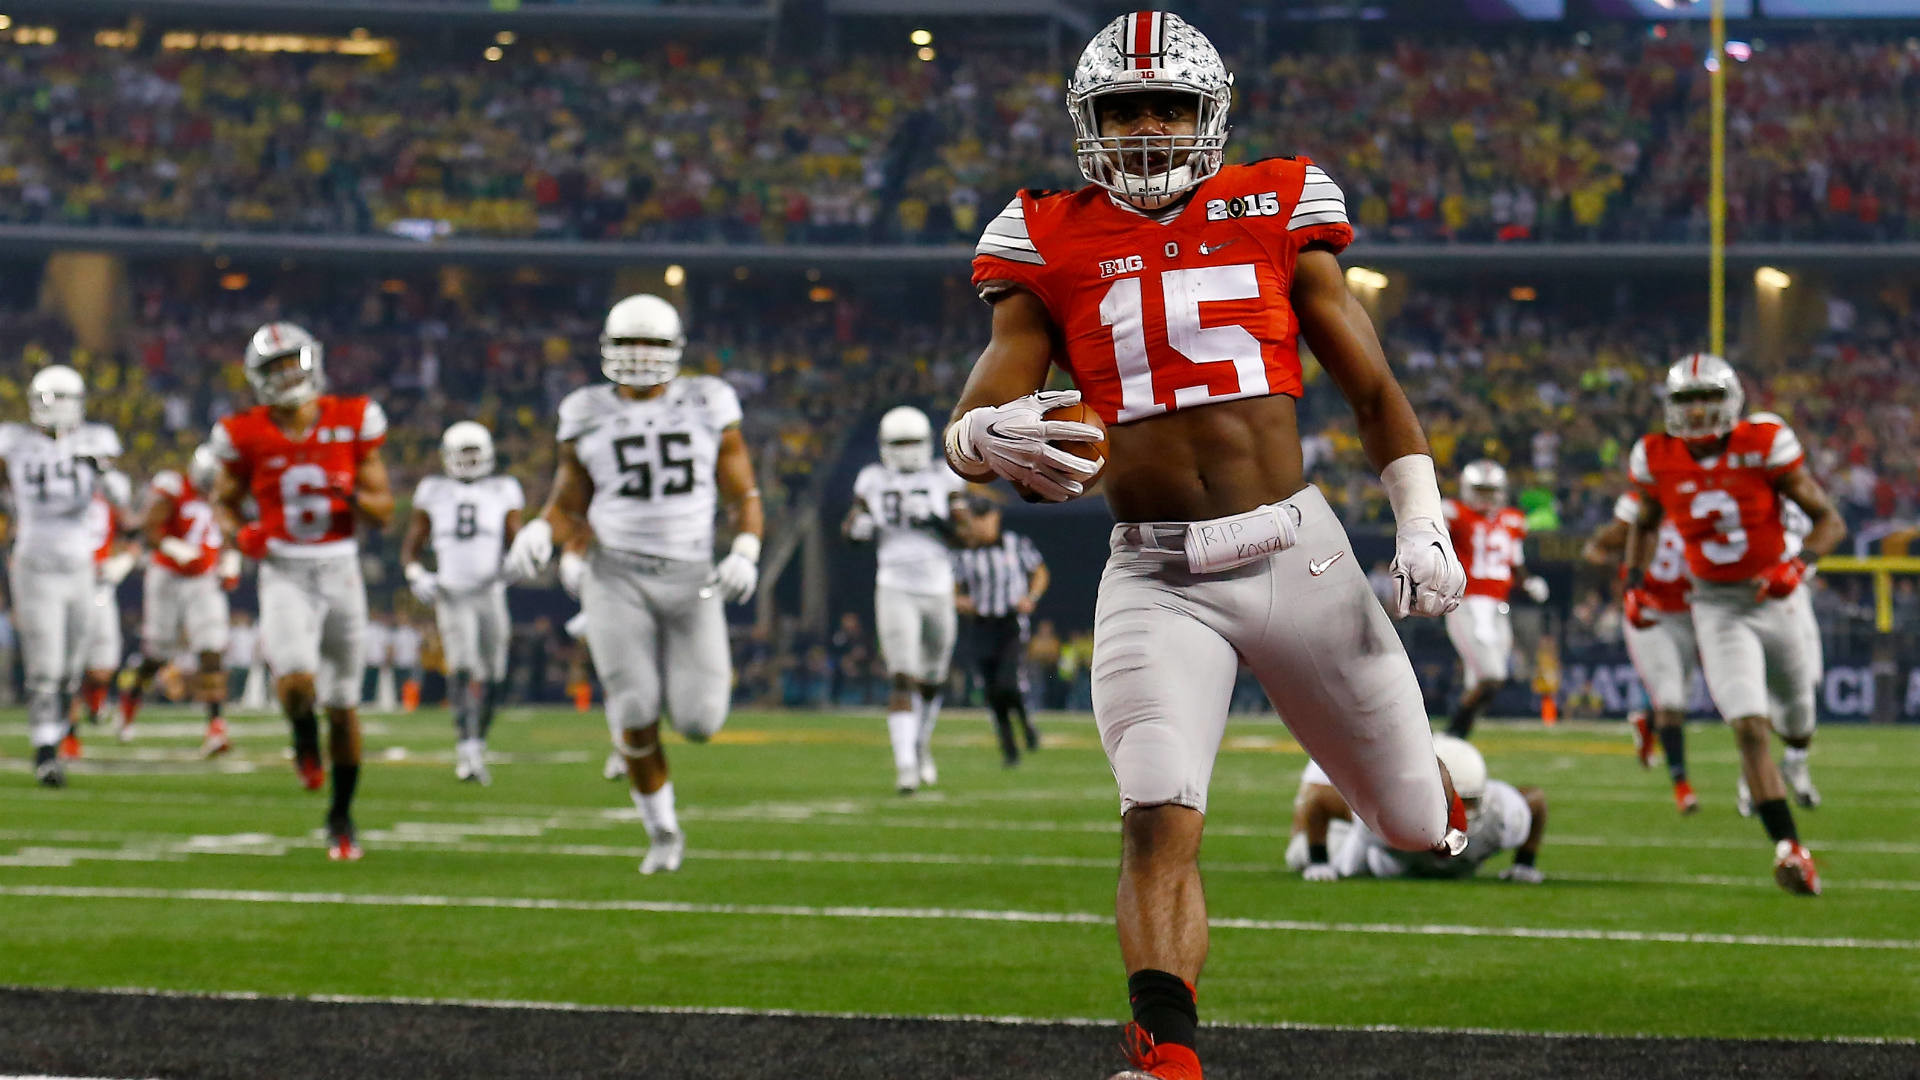 1920x1080 Ohio State Buckeyes Make College Football Playoff Their Own - The .